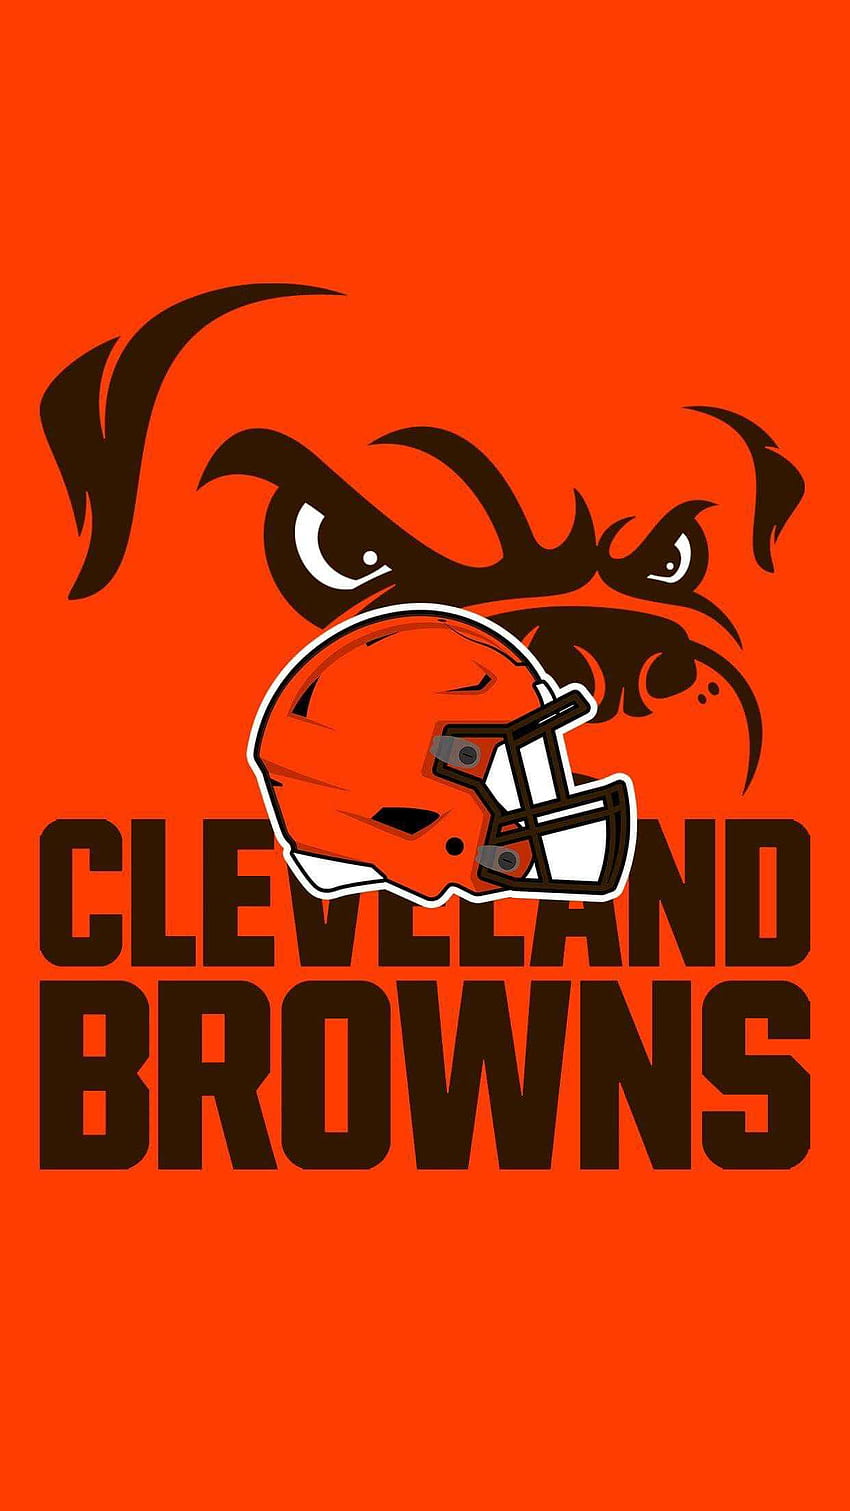 Pin on Cleveland Browns wallpapers